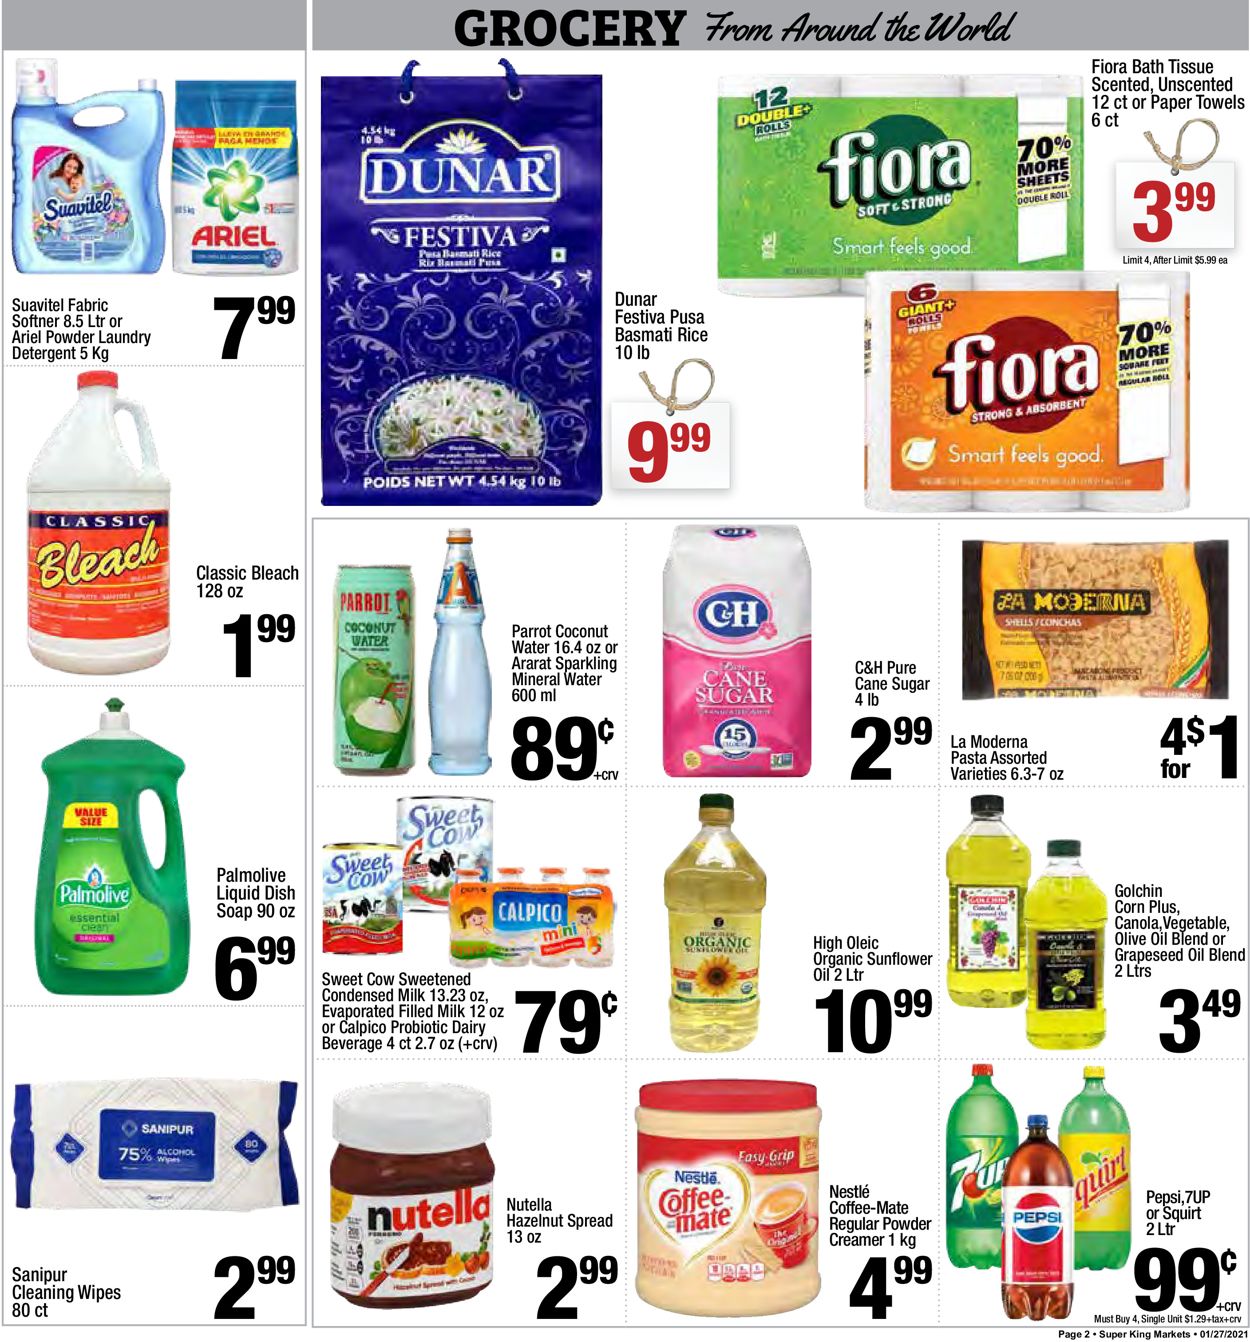 Catalogue Super King Market from 01/27/2021